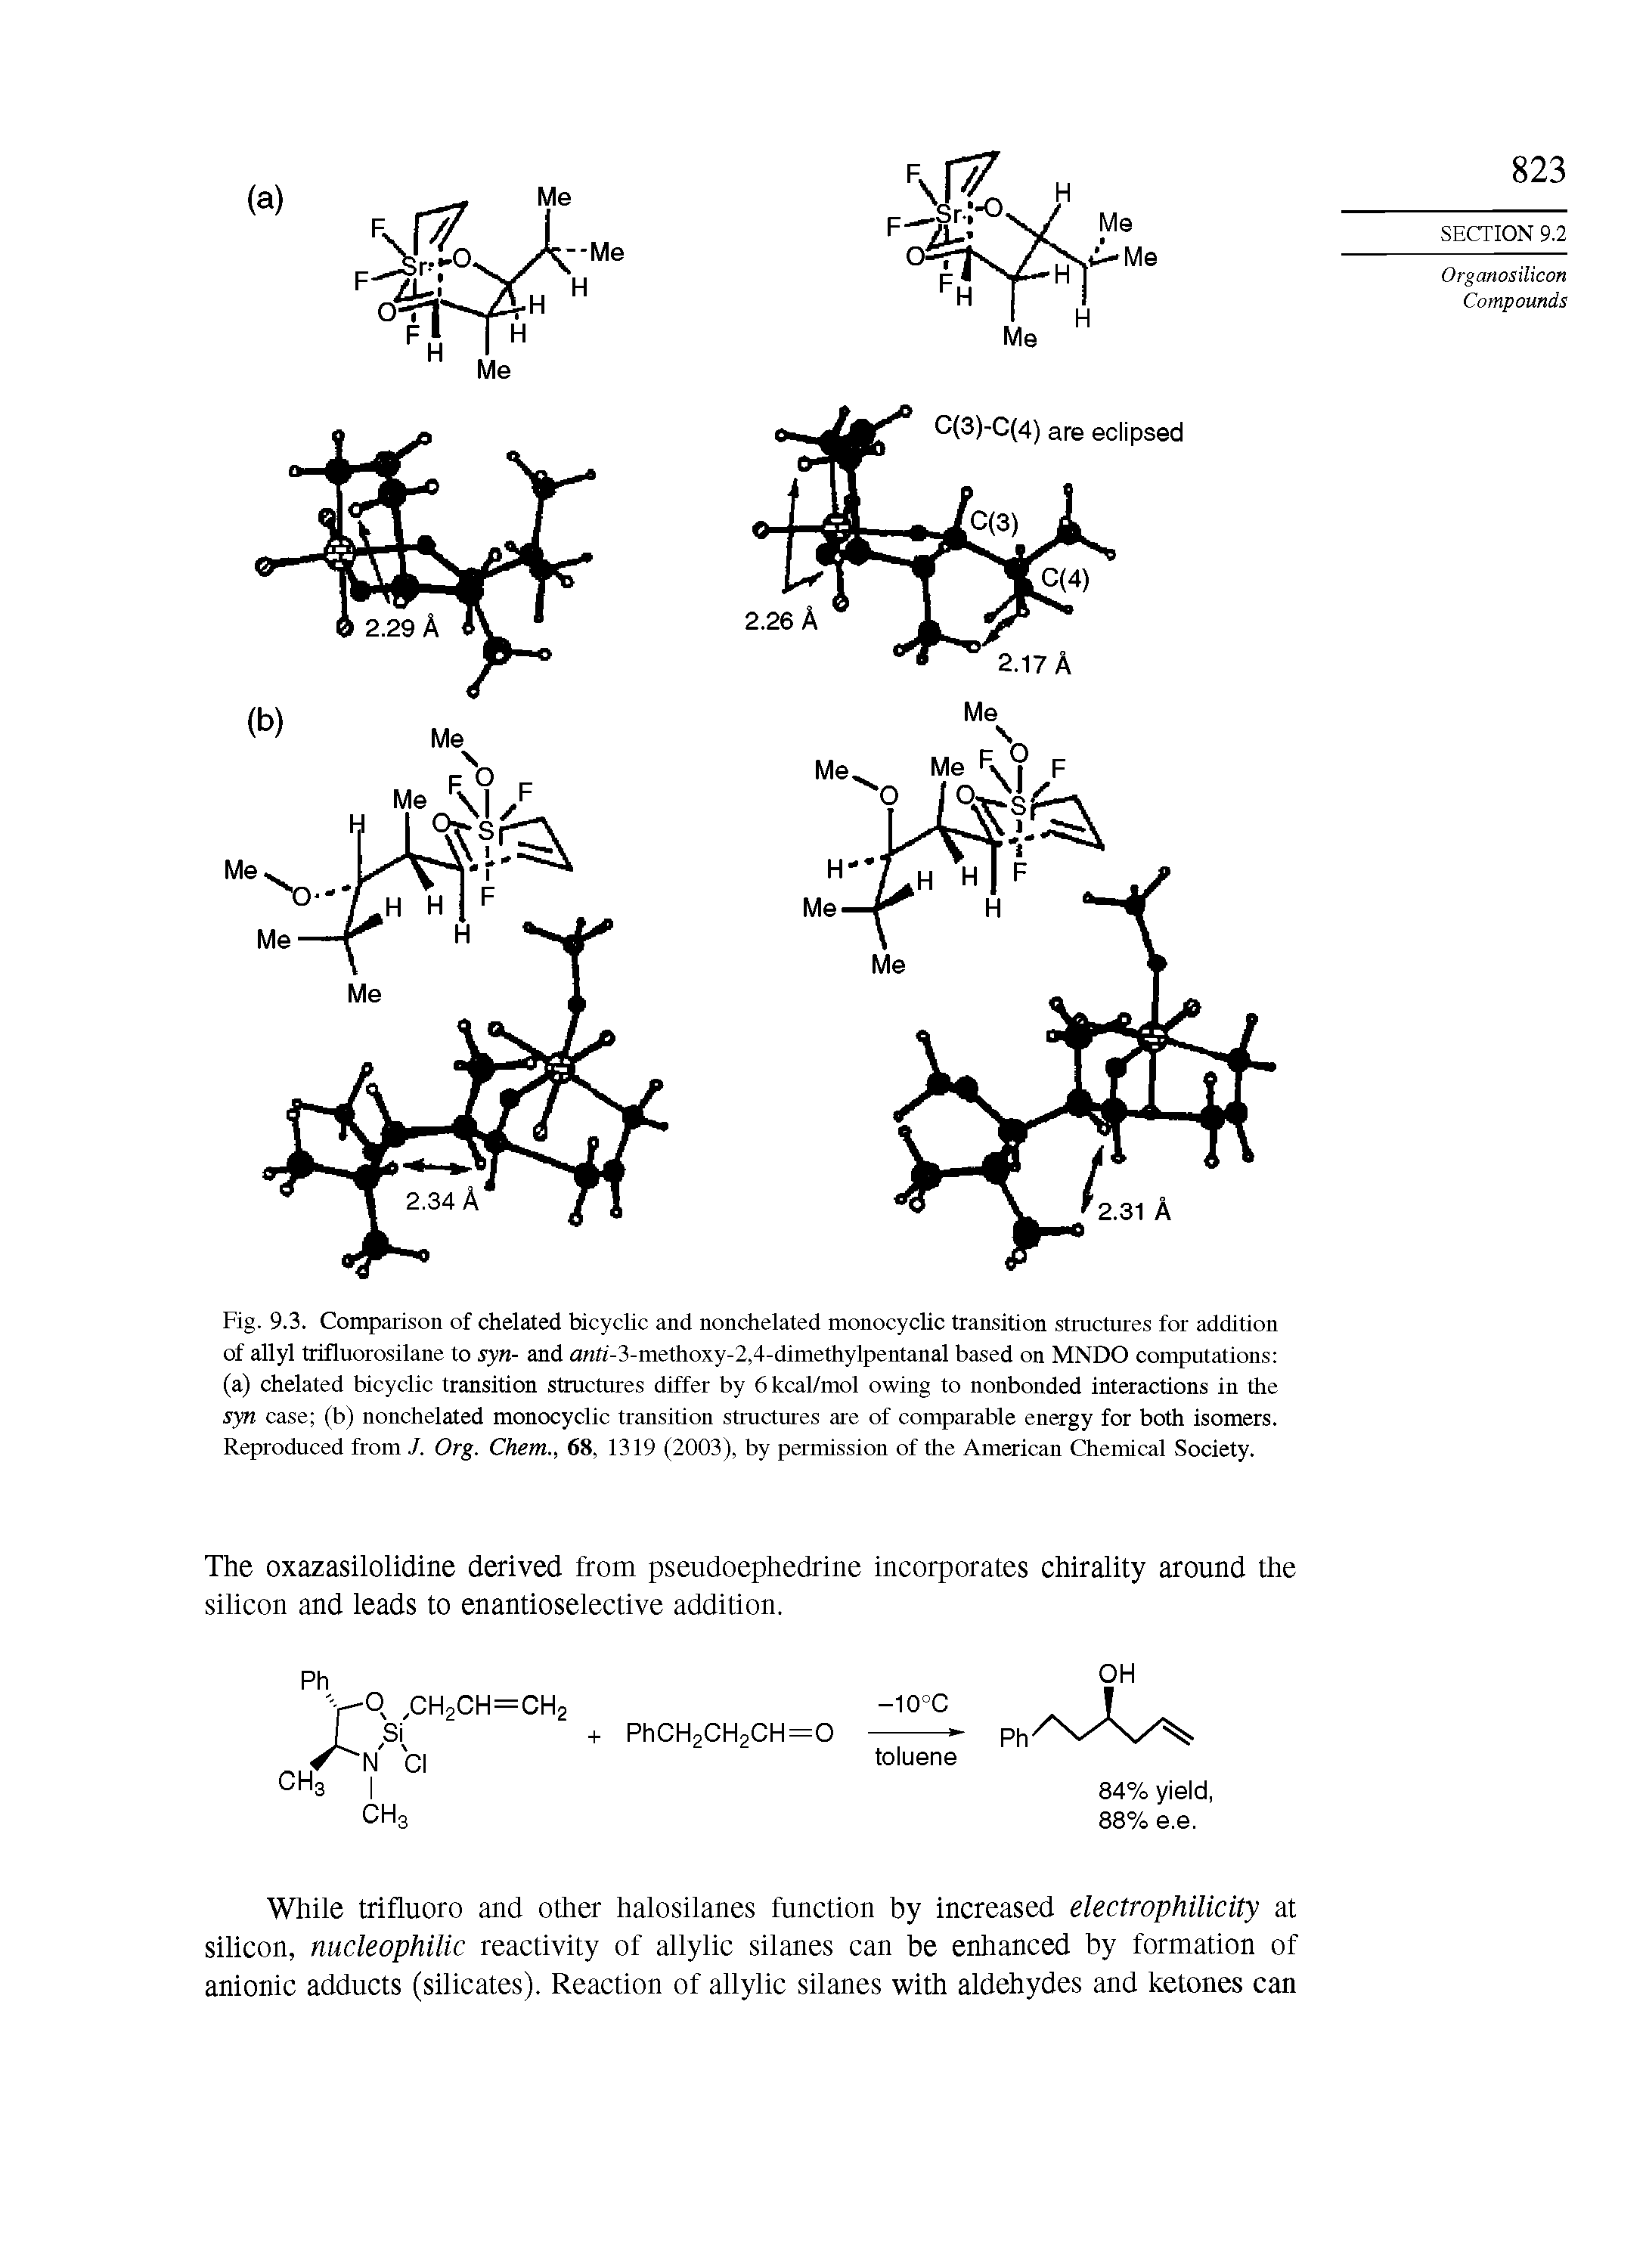 Fig. 9.3. Comparison of chelated bicyclic and nonchelated monocyclic transition structures for addition of allyl trifluorosilane to syn- and tf ft -3-methoxy-2,4-dimethylpentanal based on MNDO computations (a) chelated bicyclic transition structures differ by 6kcal/mol owing to nonbonded interactions in the syn case (b) nonchelated monocyclic transition structures are of comparable energy for both isomers. Reproduced from J. Org. Chem., 68, 1319 (2003), by permission of the American Chemical Society.